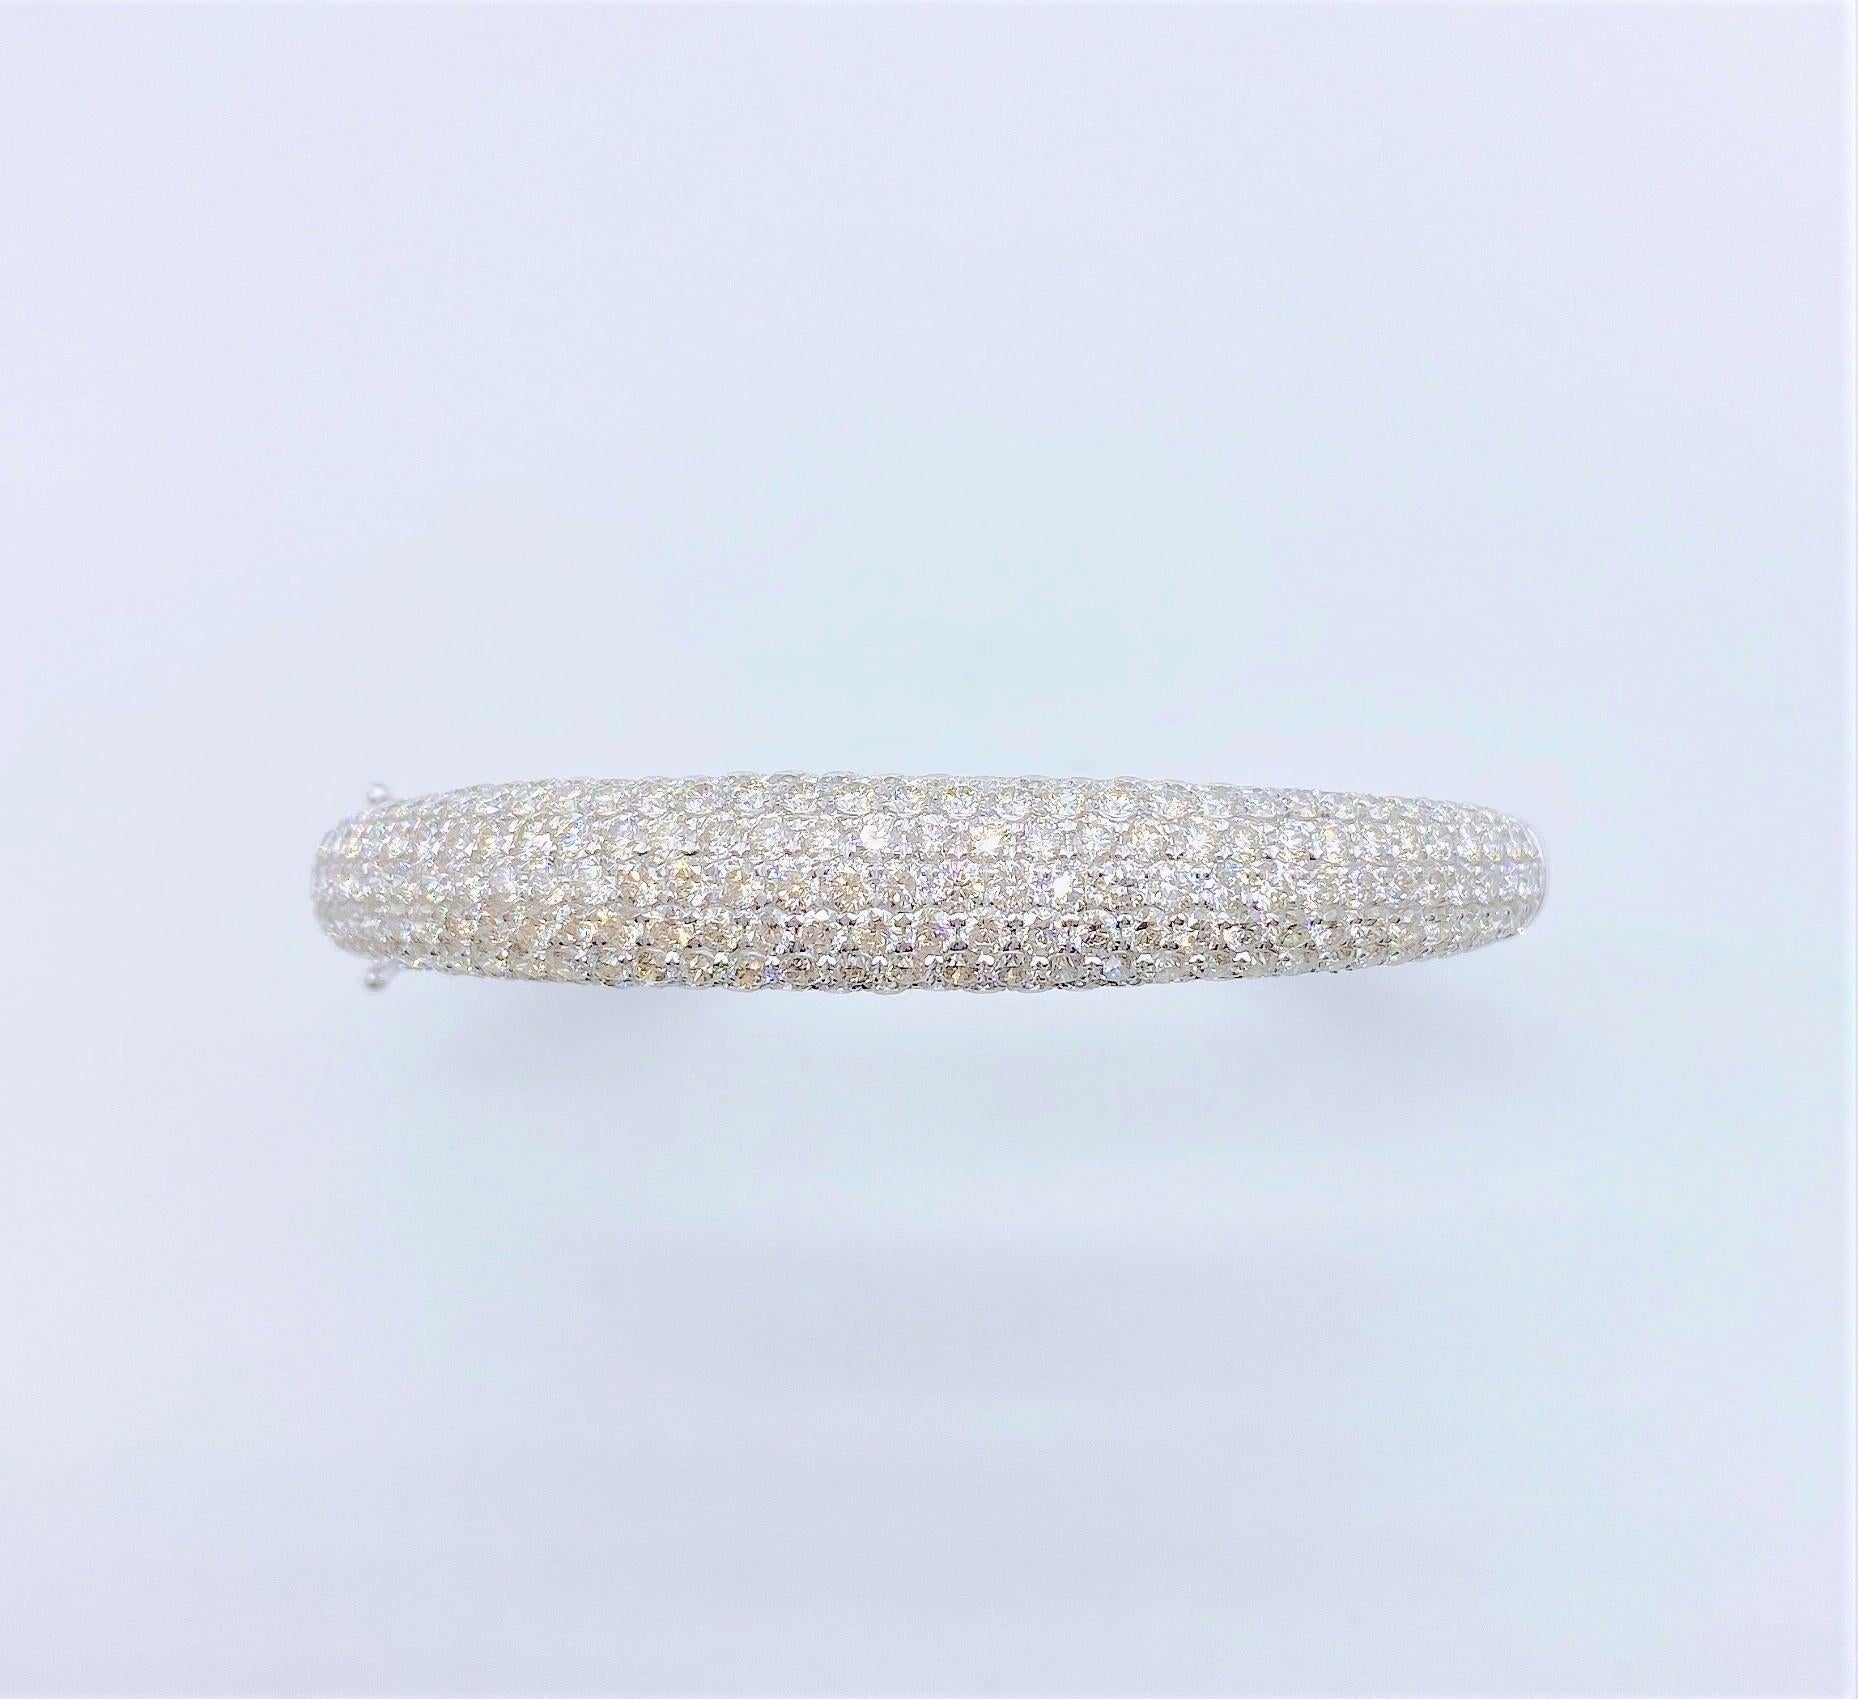 The Following Item we are Offering is an Extremely Rare Beautiful 18KT White Gold Fine Extraordinary Large Diamond Bangle Cuff Bracelet comprised of approx. 6.50CTS of Fine Fancy Glittering White Diamonds!! This Gorgeous Bangle is from a Top Private